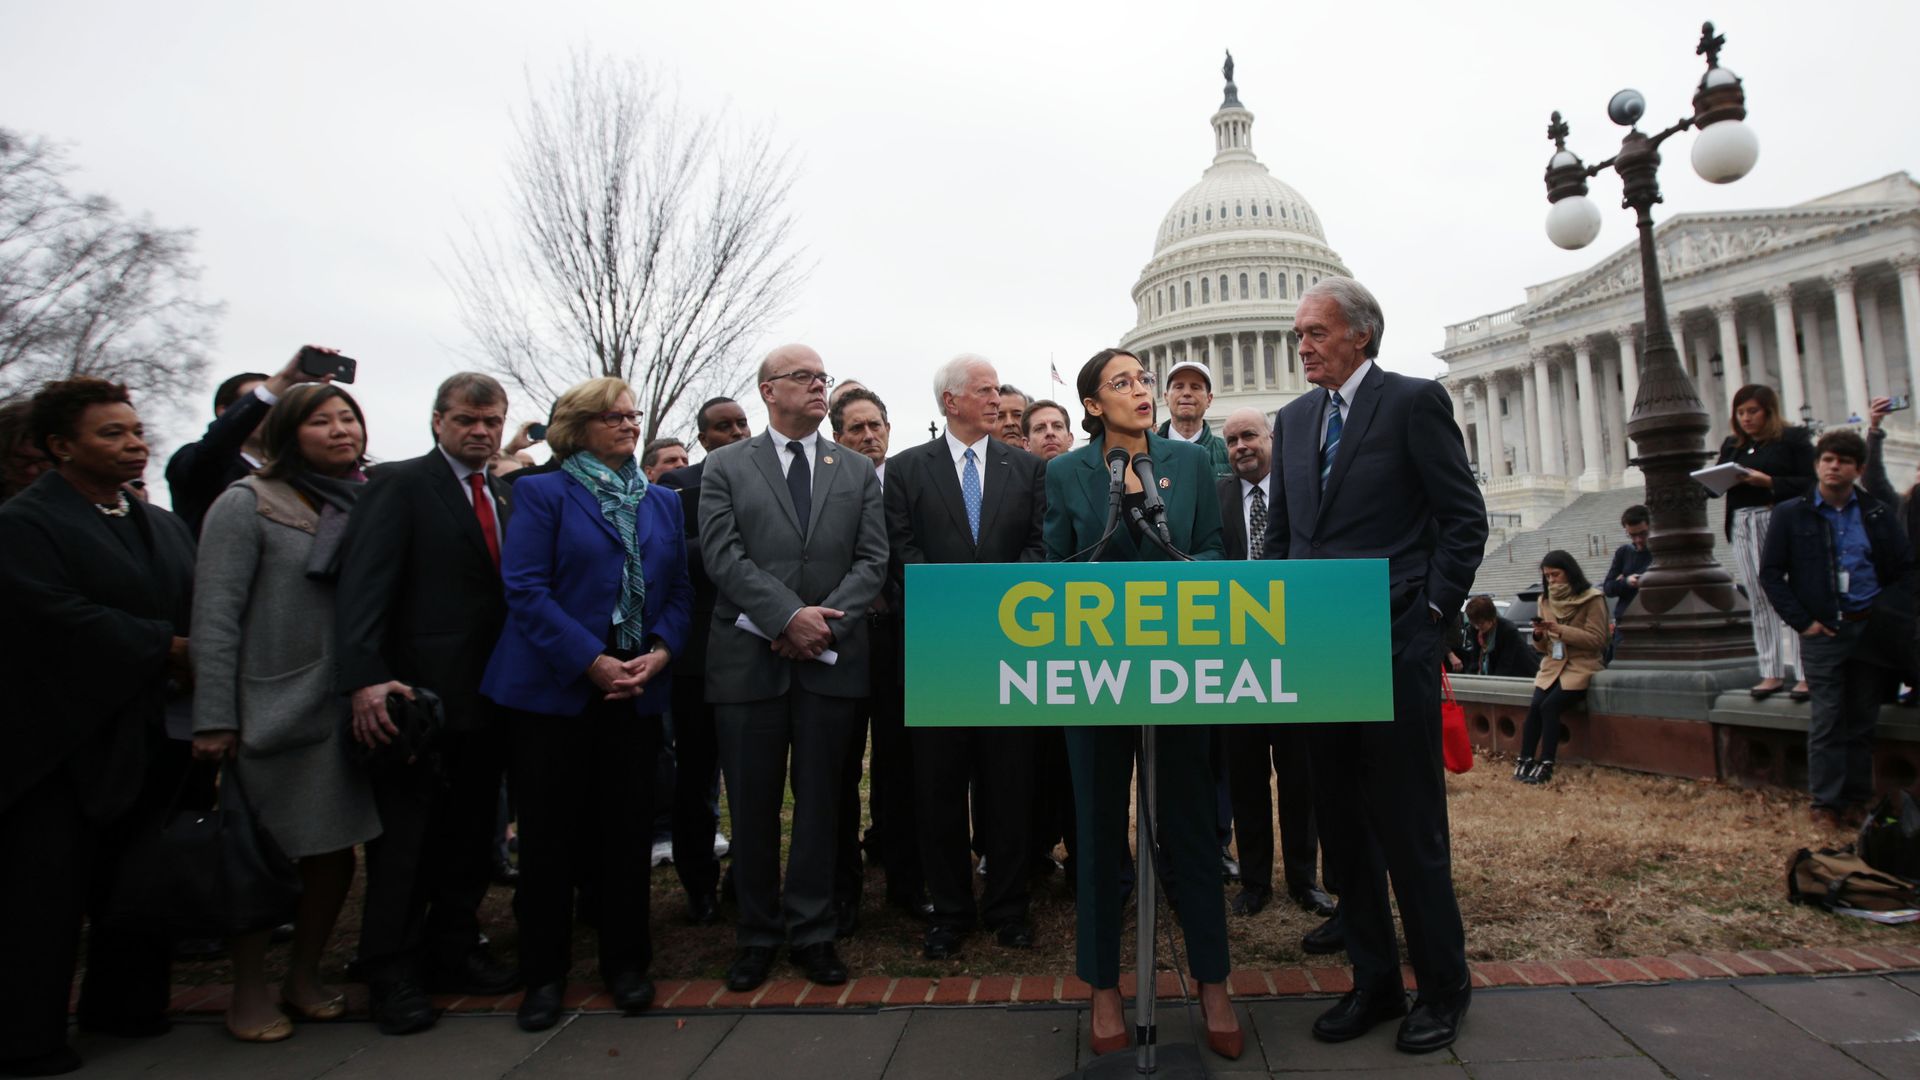 In this image, Alexandria Ocasio-Cortez stands alongside other Democrats outside the Capitol building on a sunny day in Washington. They hold a banner that says "Green New Deal." 